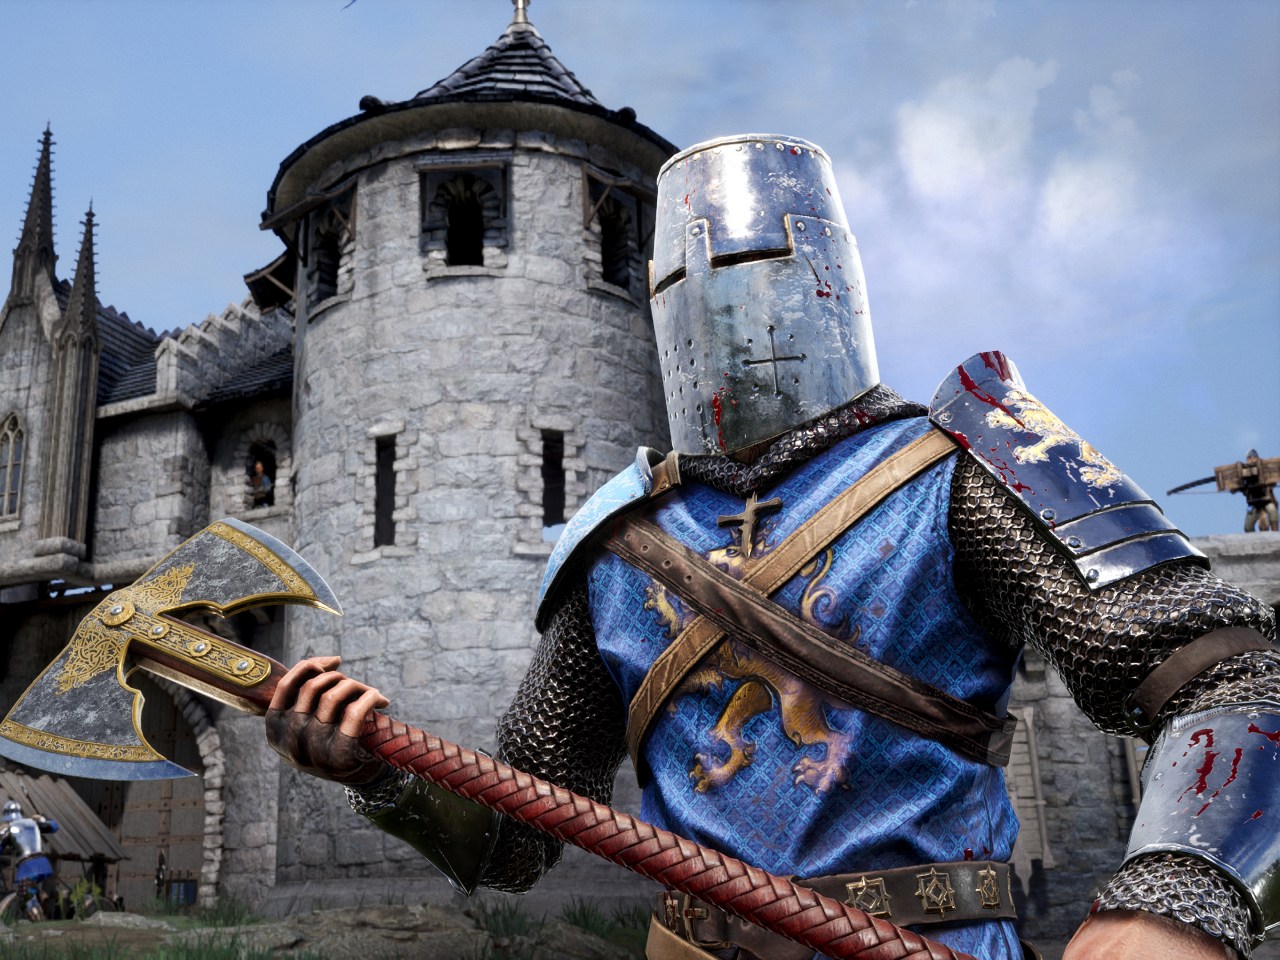 download games like chivalry